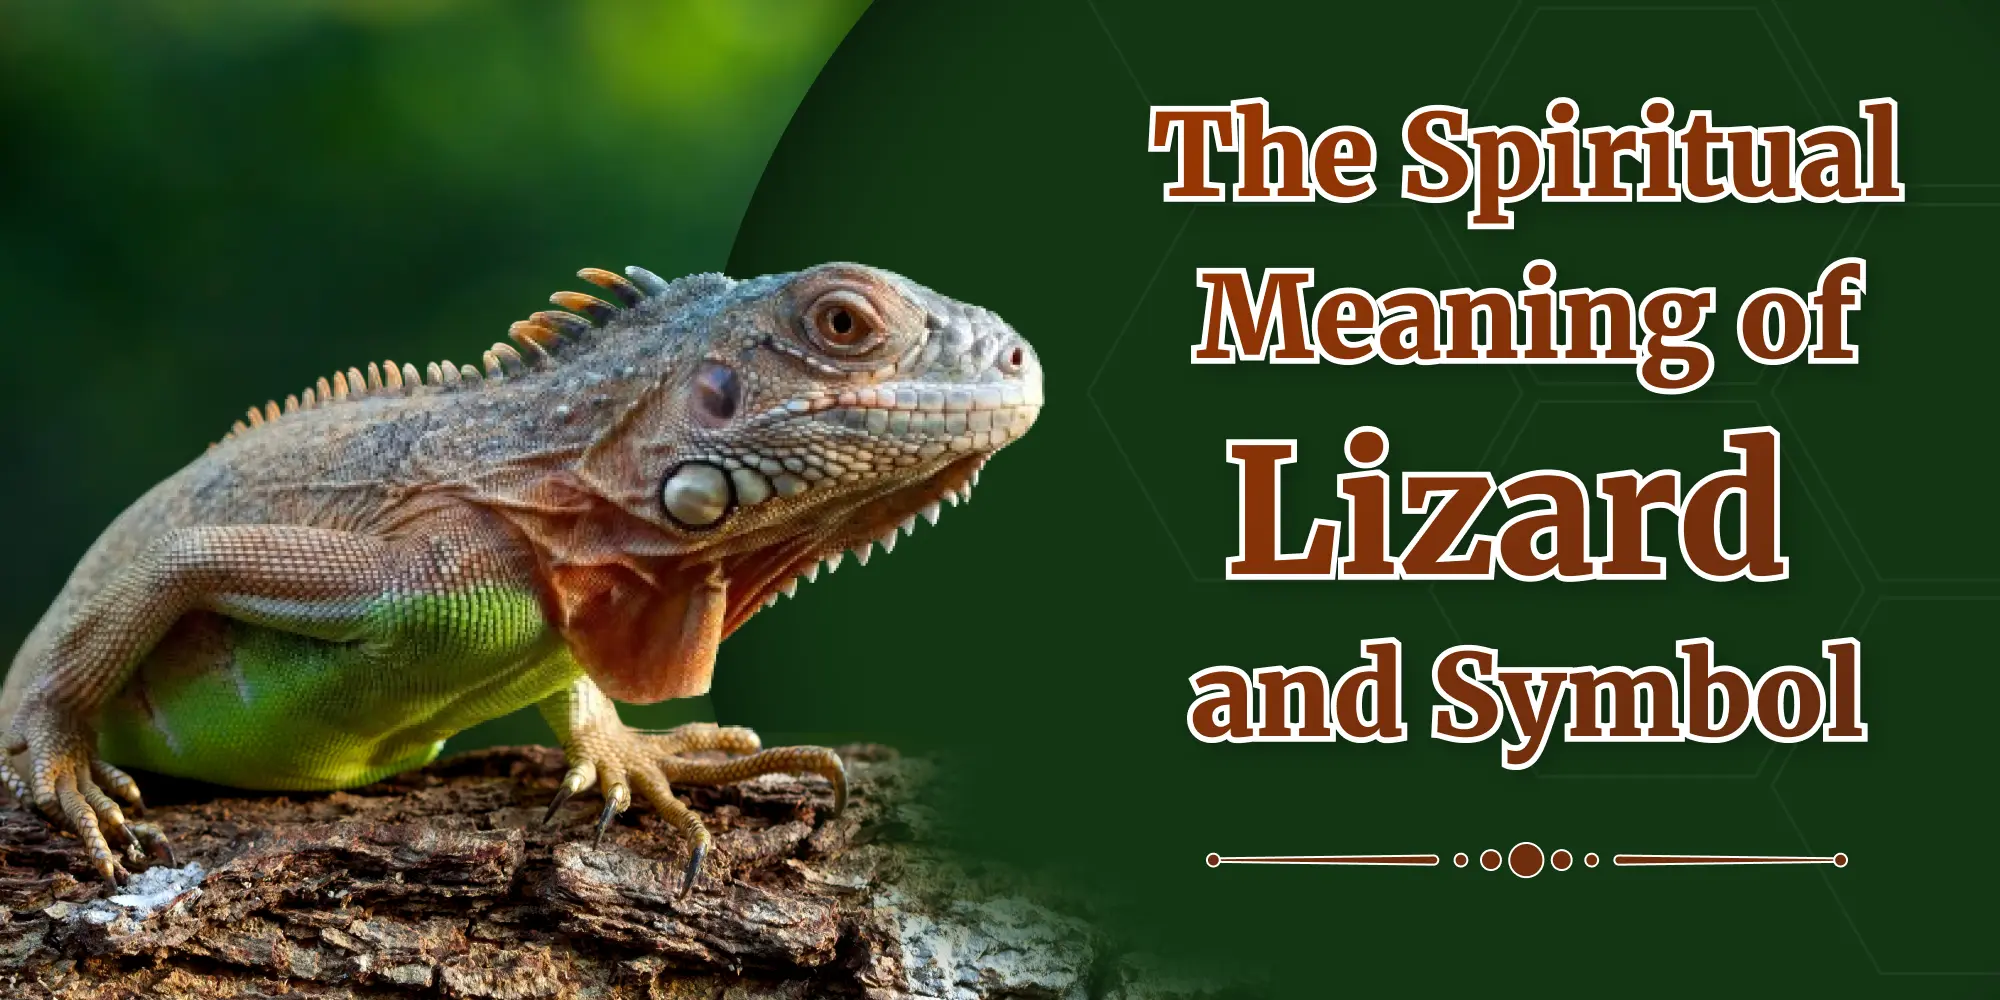 The Spiritual meaning of Lizard and Symbol